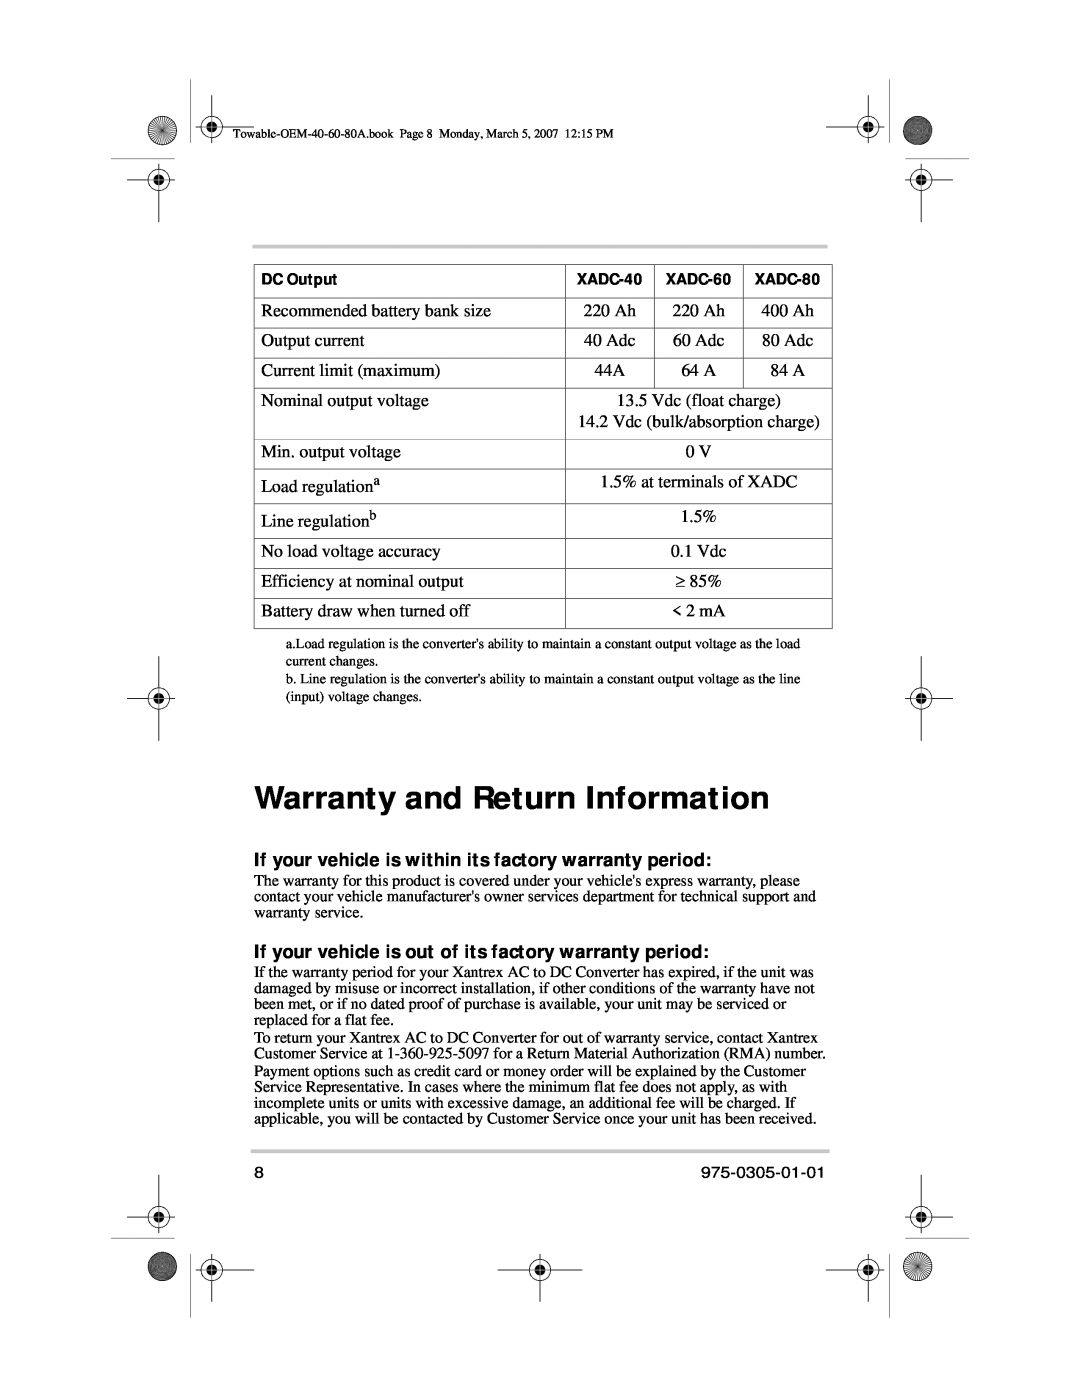 Xantrex Technology 40 A (XADC-40) Warranty and Return Information, If your vehicle is within its factory warranty period 